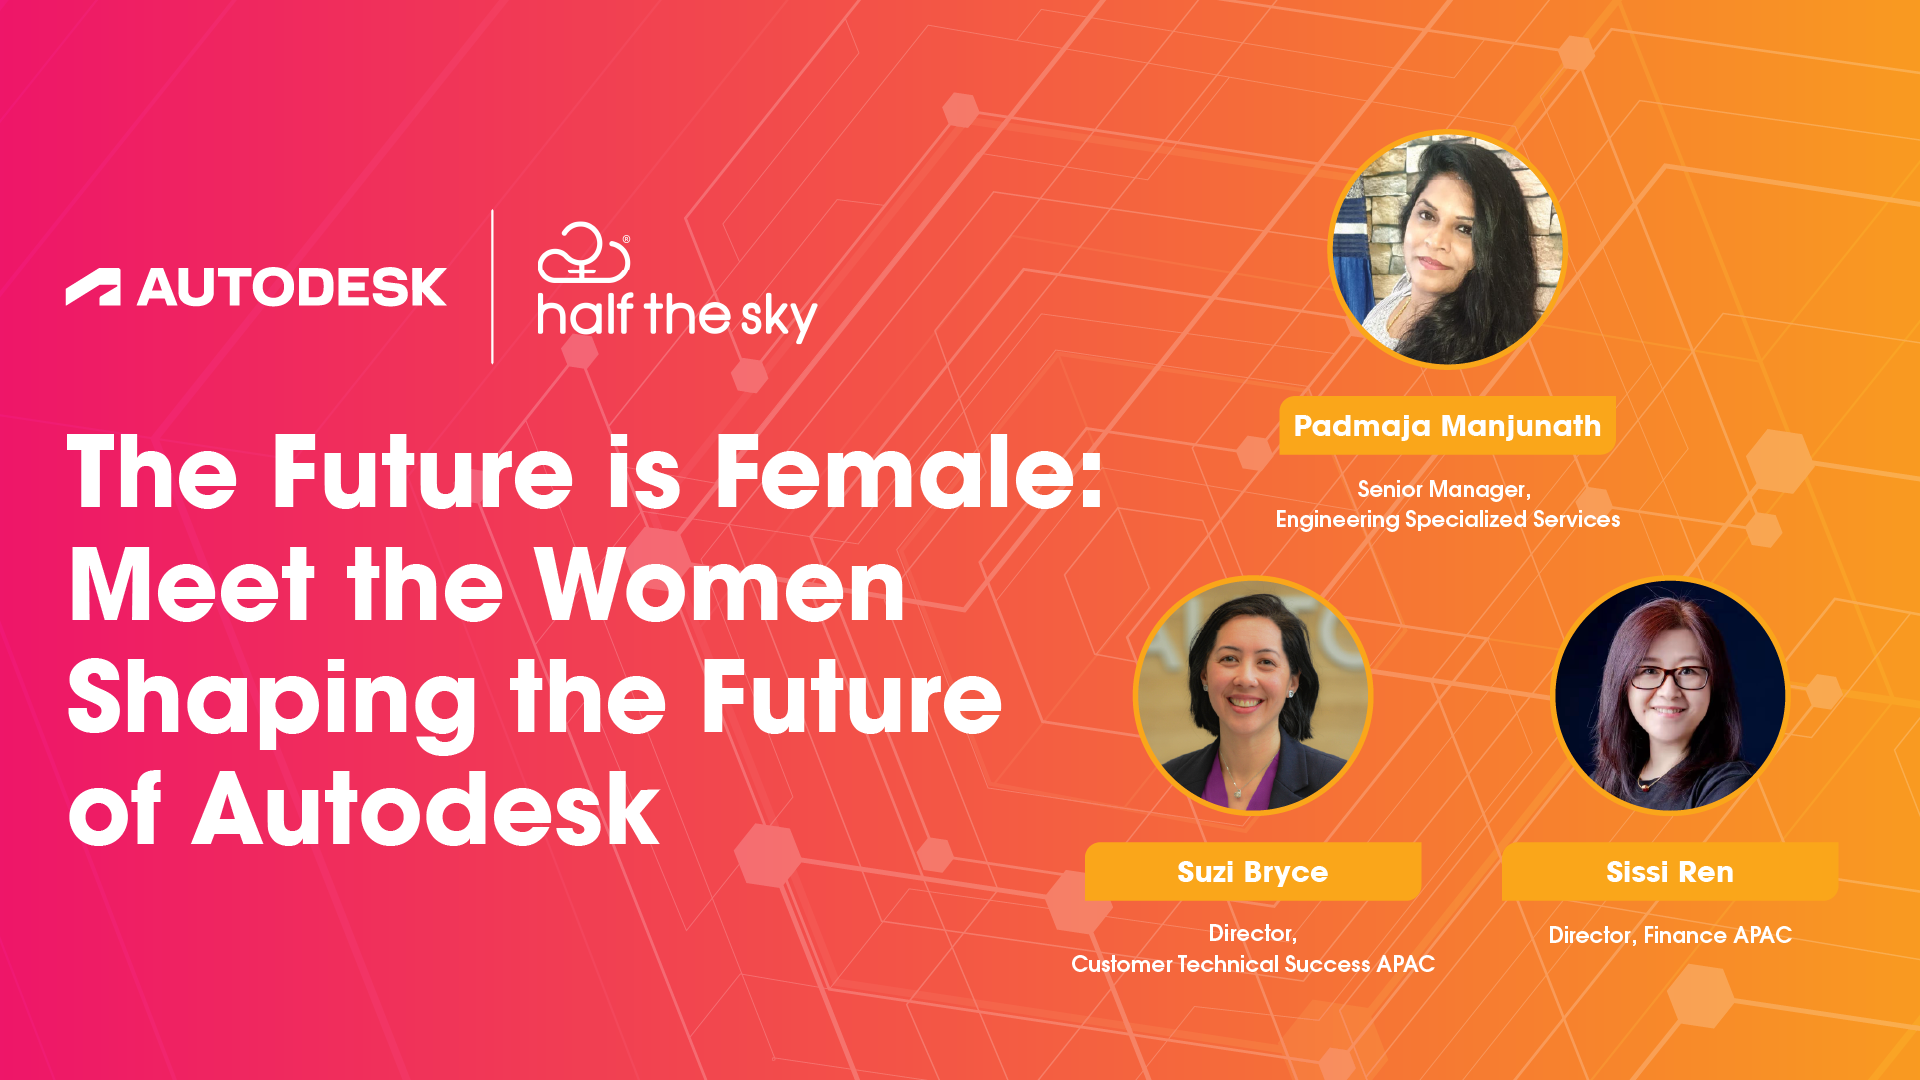 The Future is Female: Meet the Women Shaping the Future of Autodesk